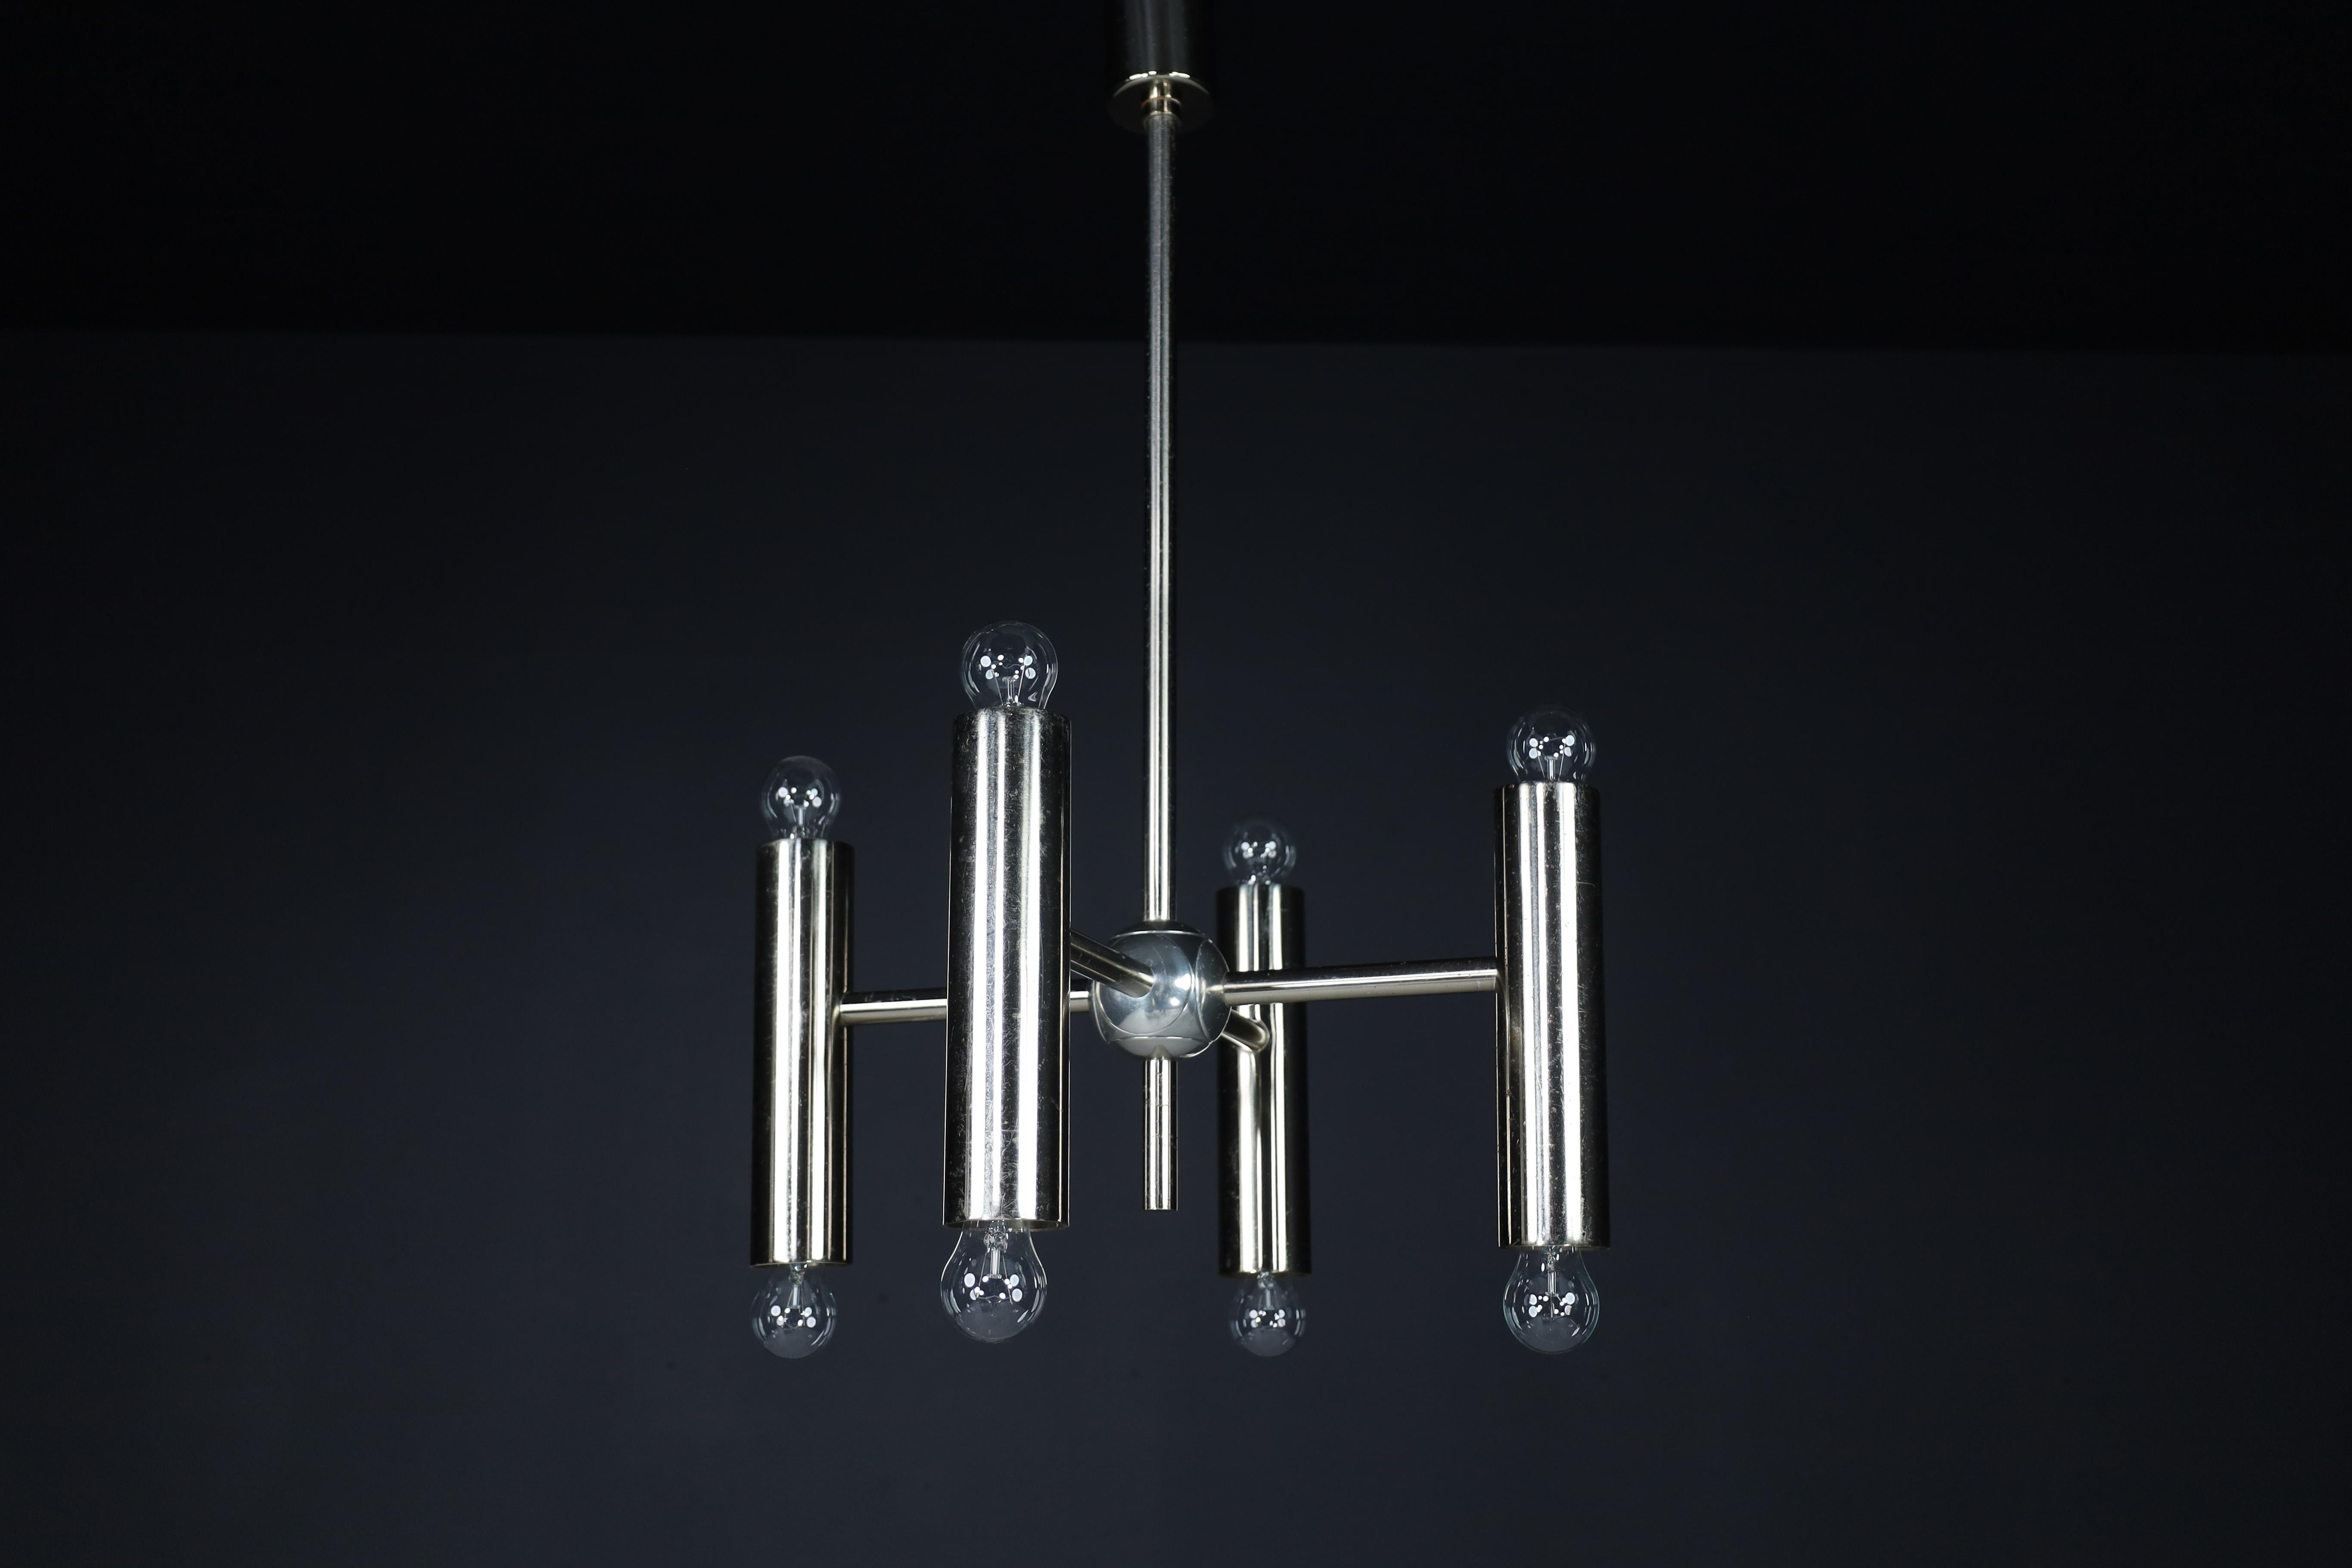 1 of 6 Minimalistic Design Geometric Chandeliers in Chrome, Germany, 1970s For Sale 1